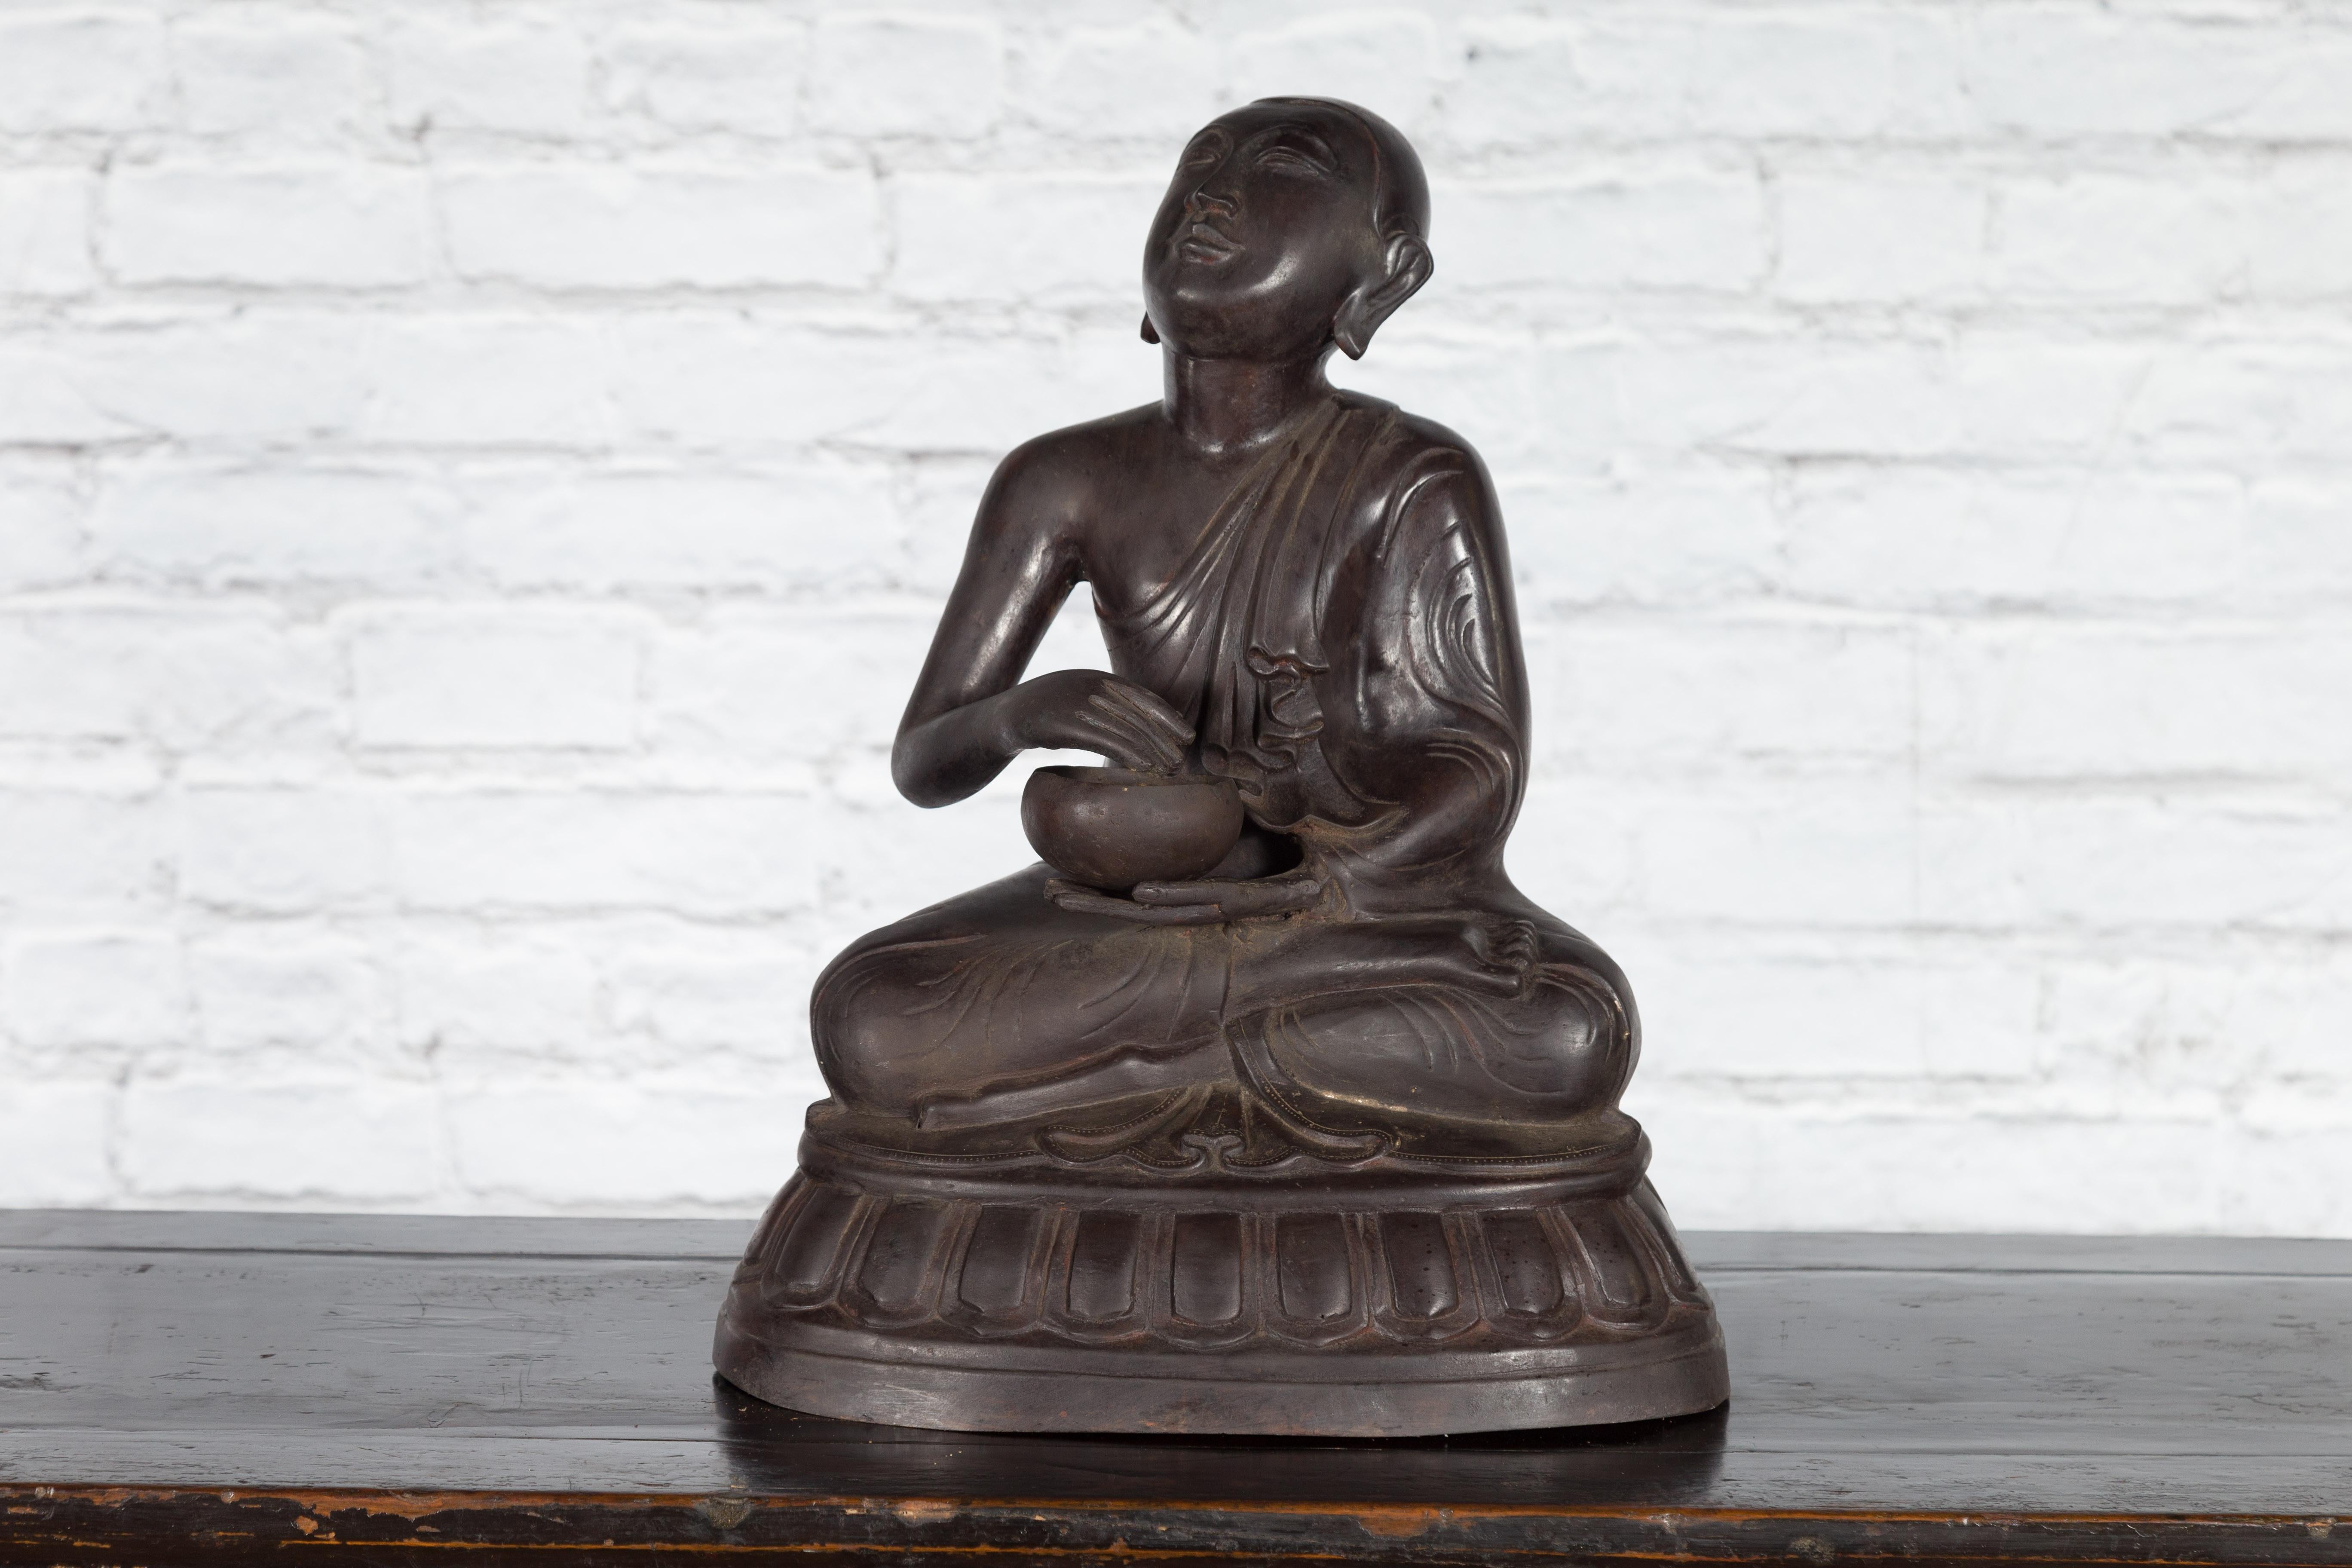 Cast Bronze Lost Wax Sculpture Depicting a Praying Buddhist Monk with Offering Bowl For Sale